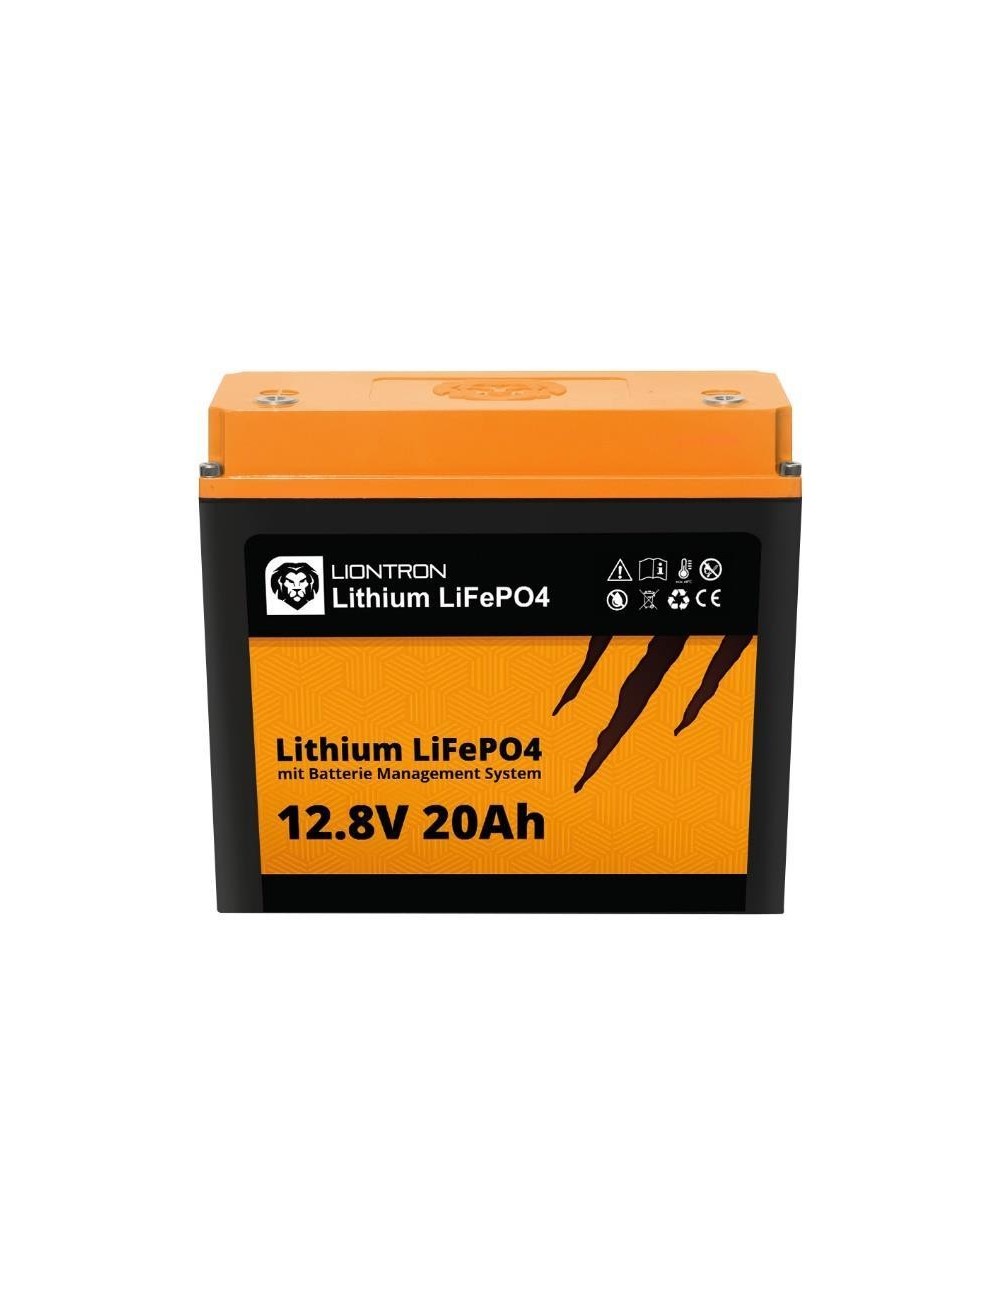 LiFePO4 Batteries for camping-cars car and RV